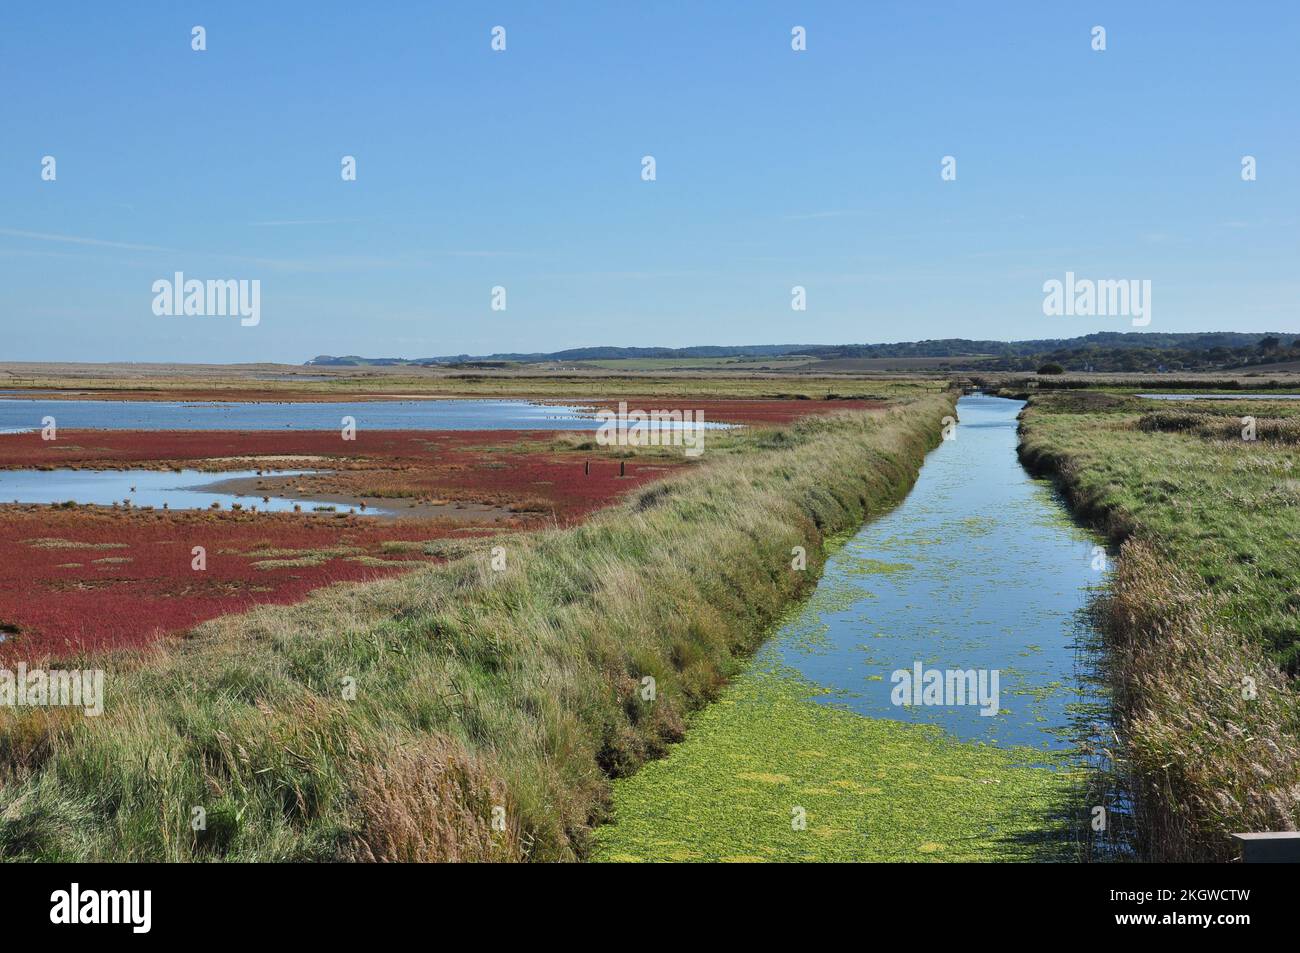 Drainage dyke and the red autumn seed colour of Common Glasswort (Salicornia europaea) in the salt marshes of Cley next the Sea, Norfolk, England, UK Stock Photo